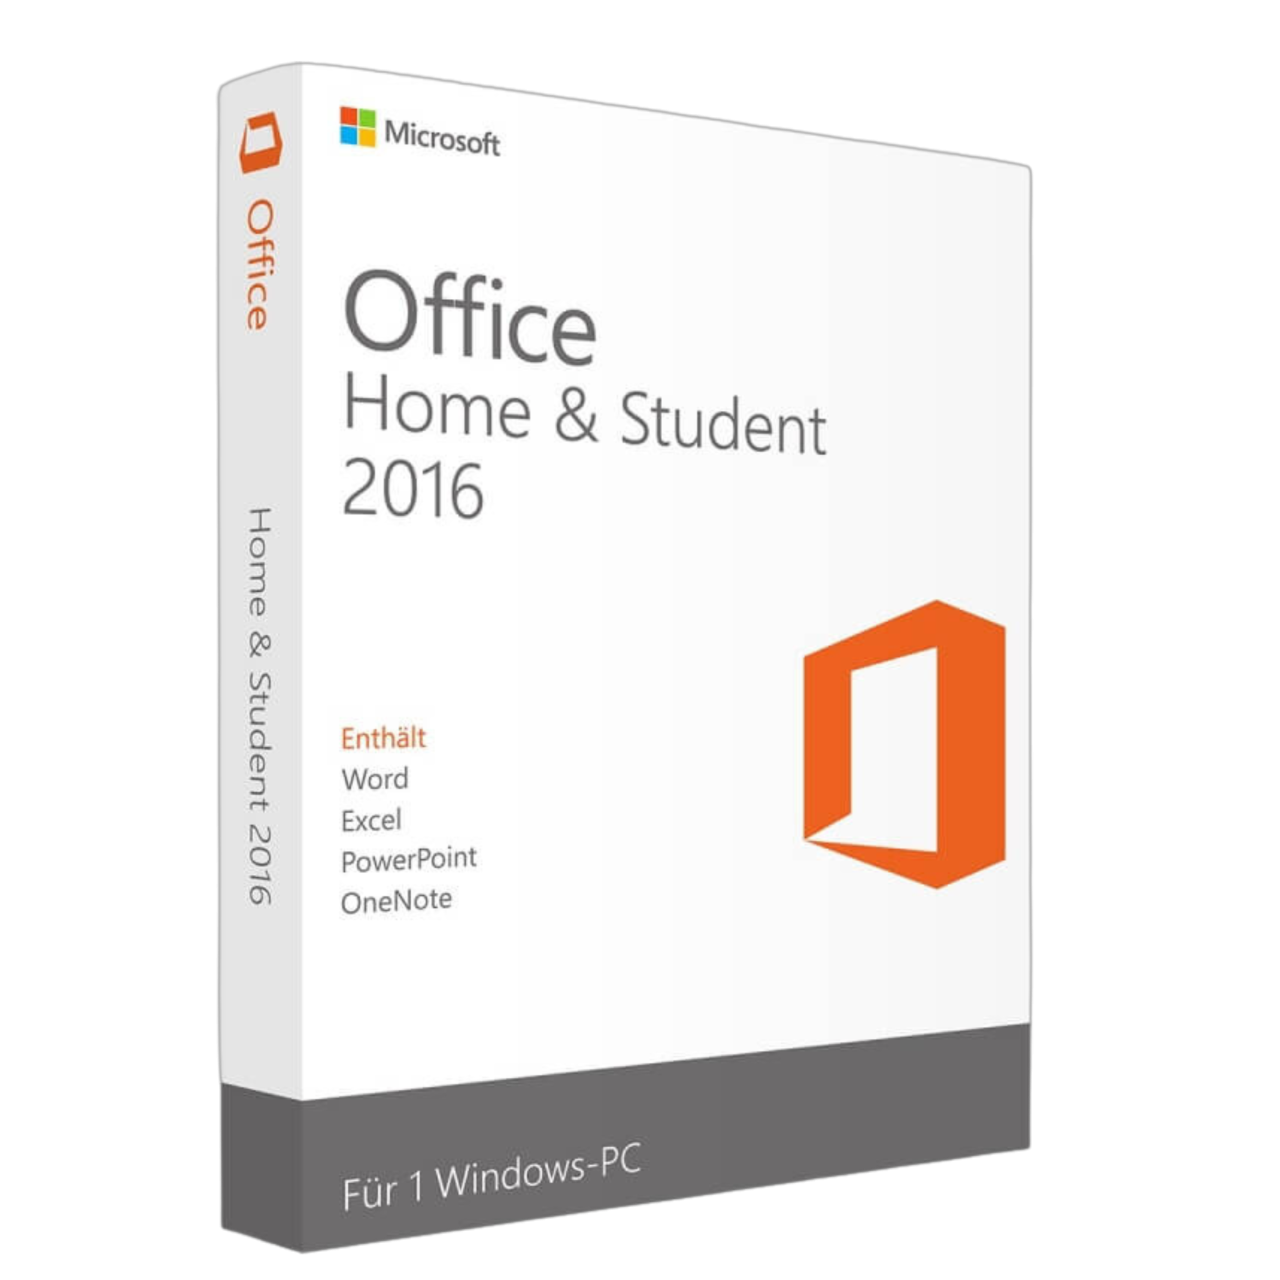 Office 2016 Home e Student